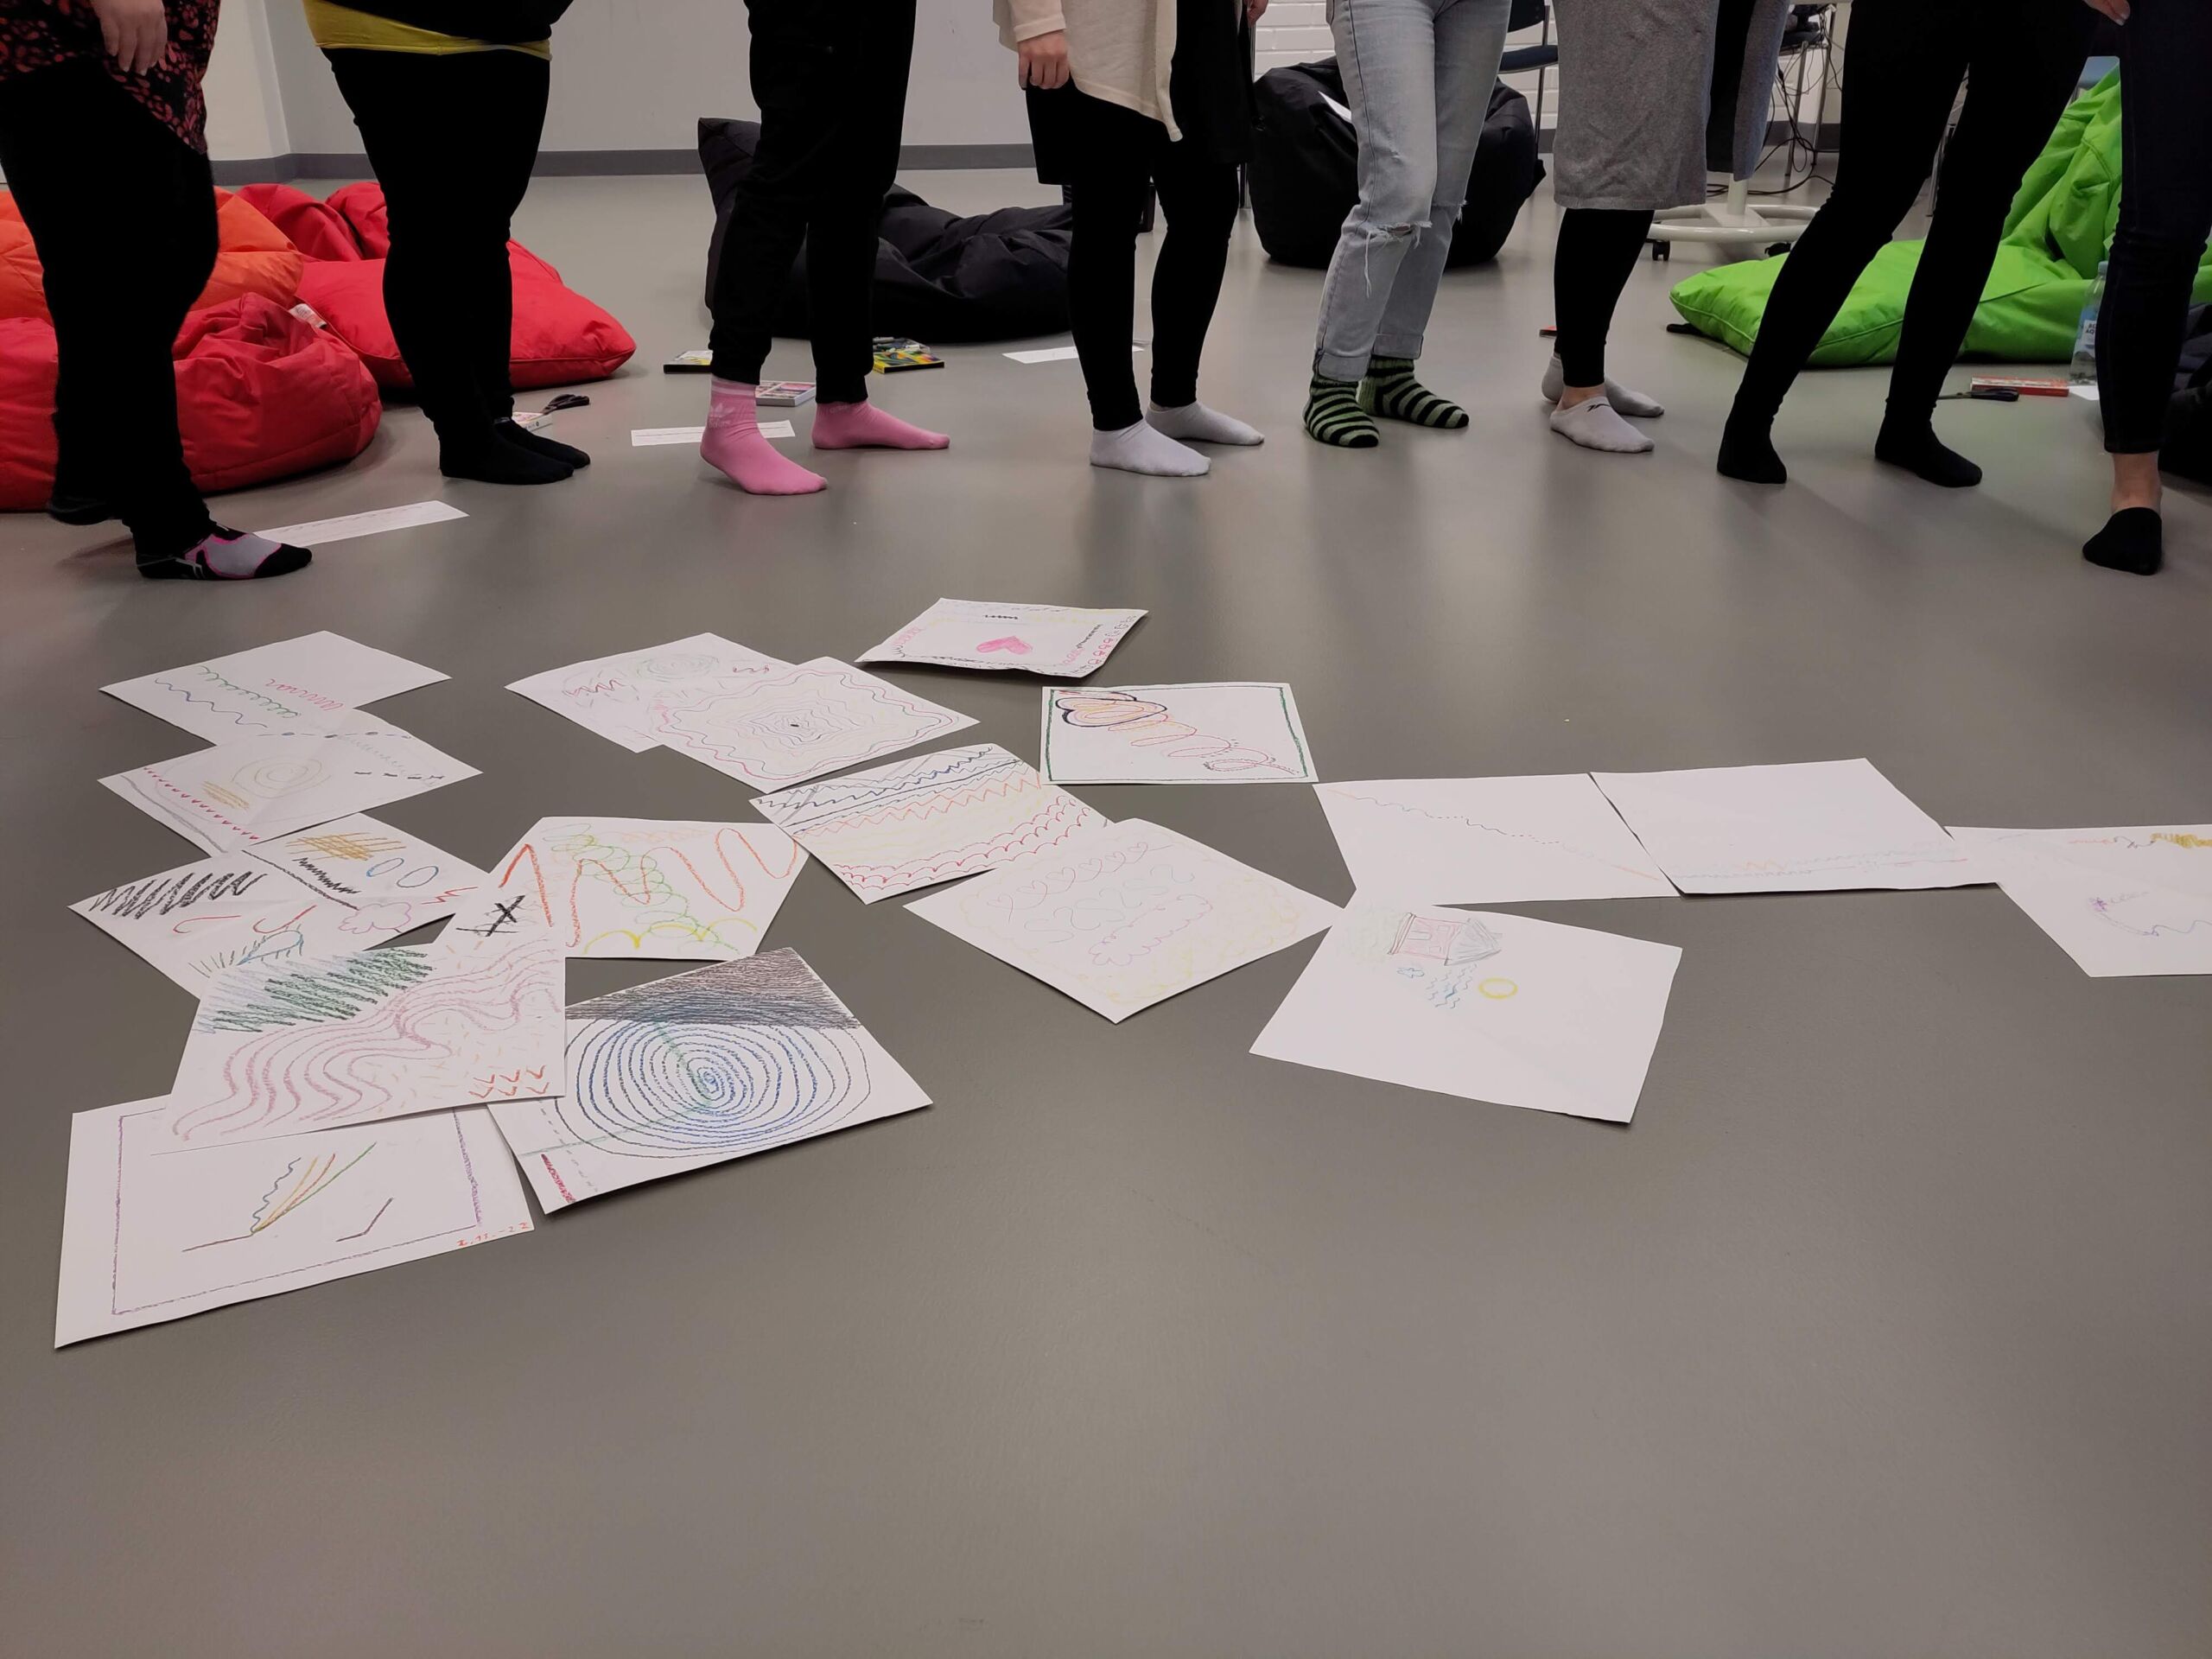 There are square-shaped papers with abstract line images on the floor. People are standing around them, only their legs can be seen.